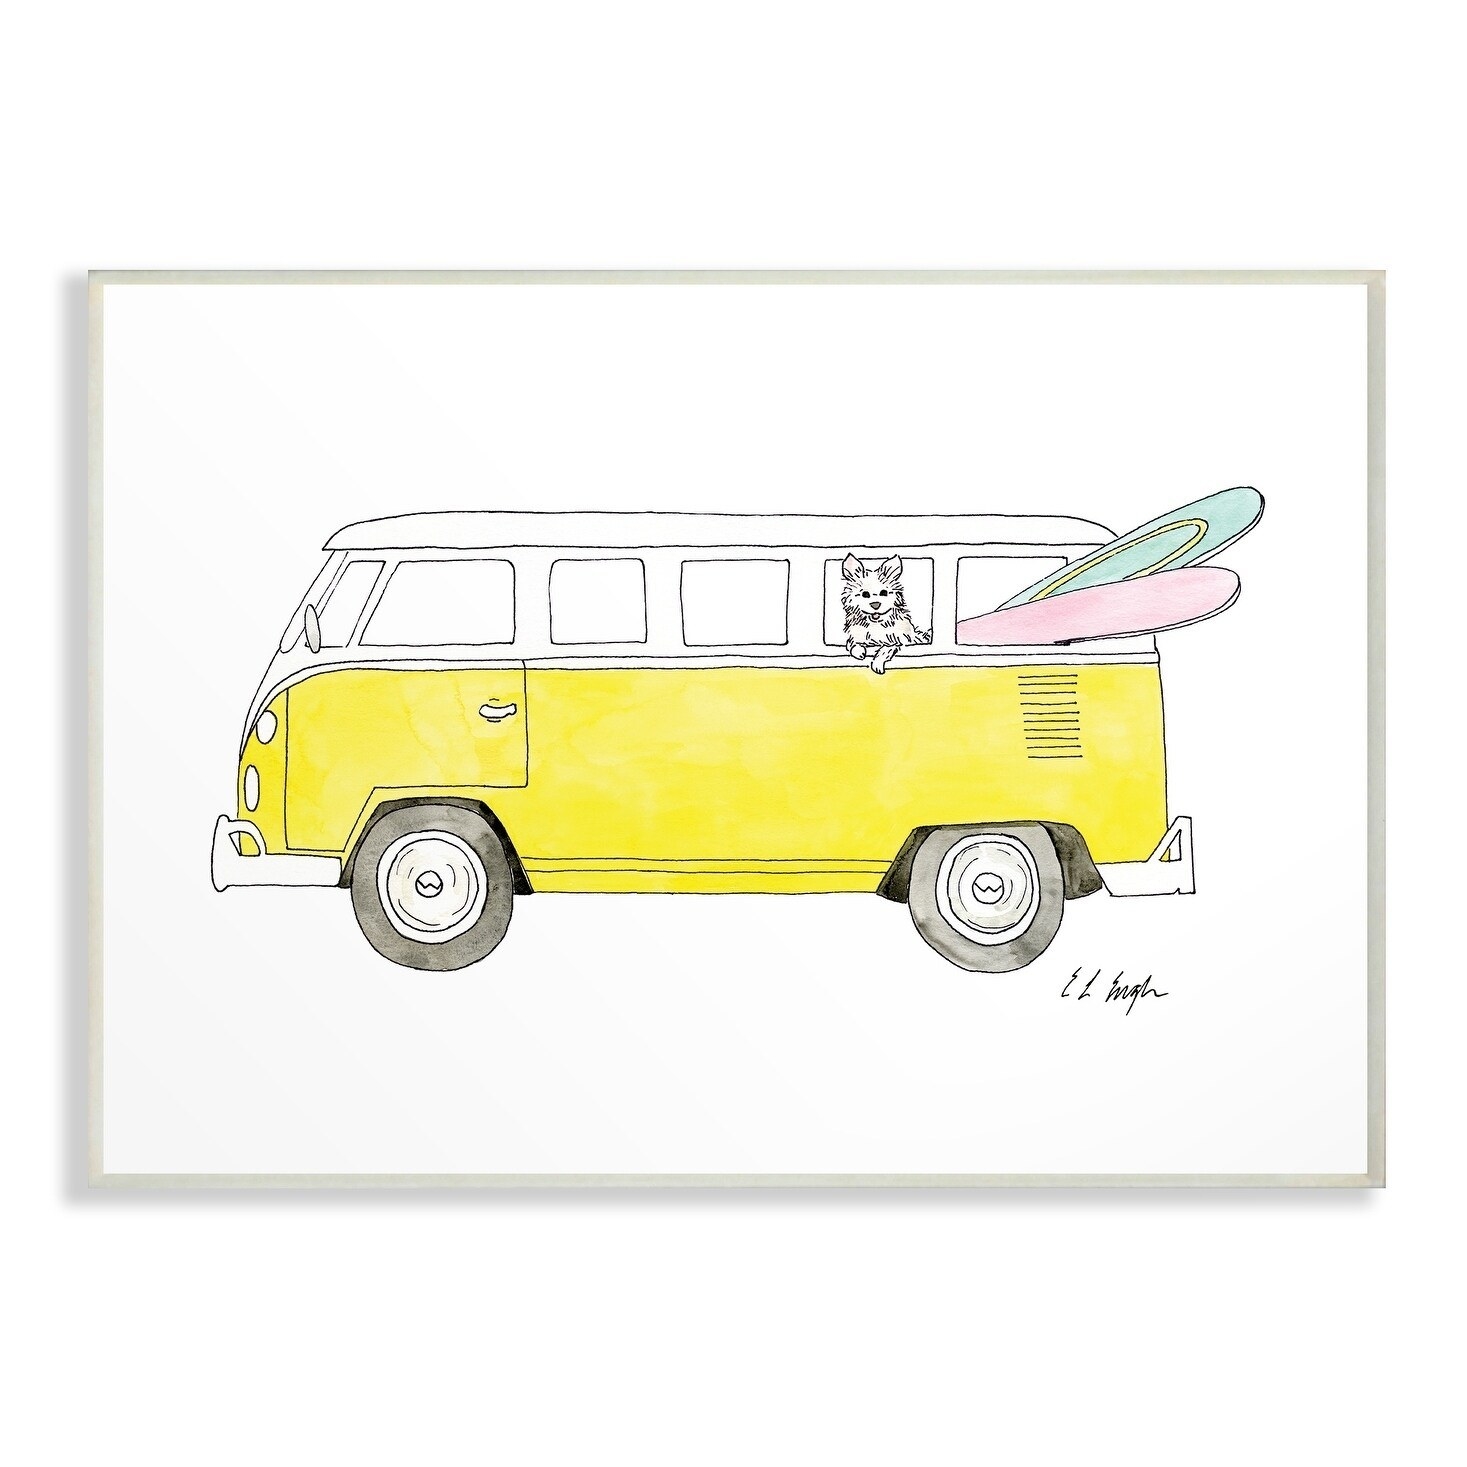 the canvas of a yellow van with a dog and two surfboards